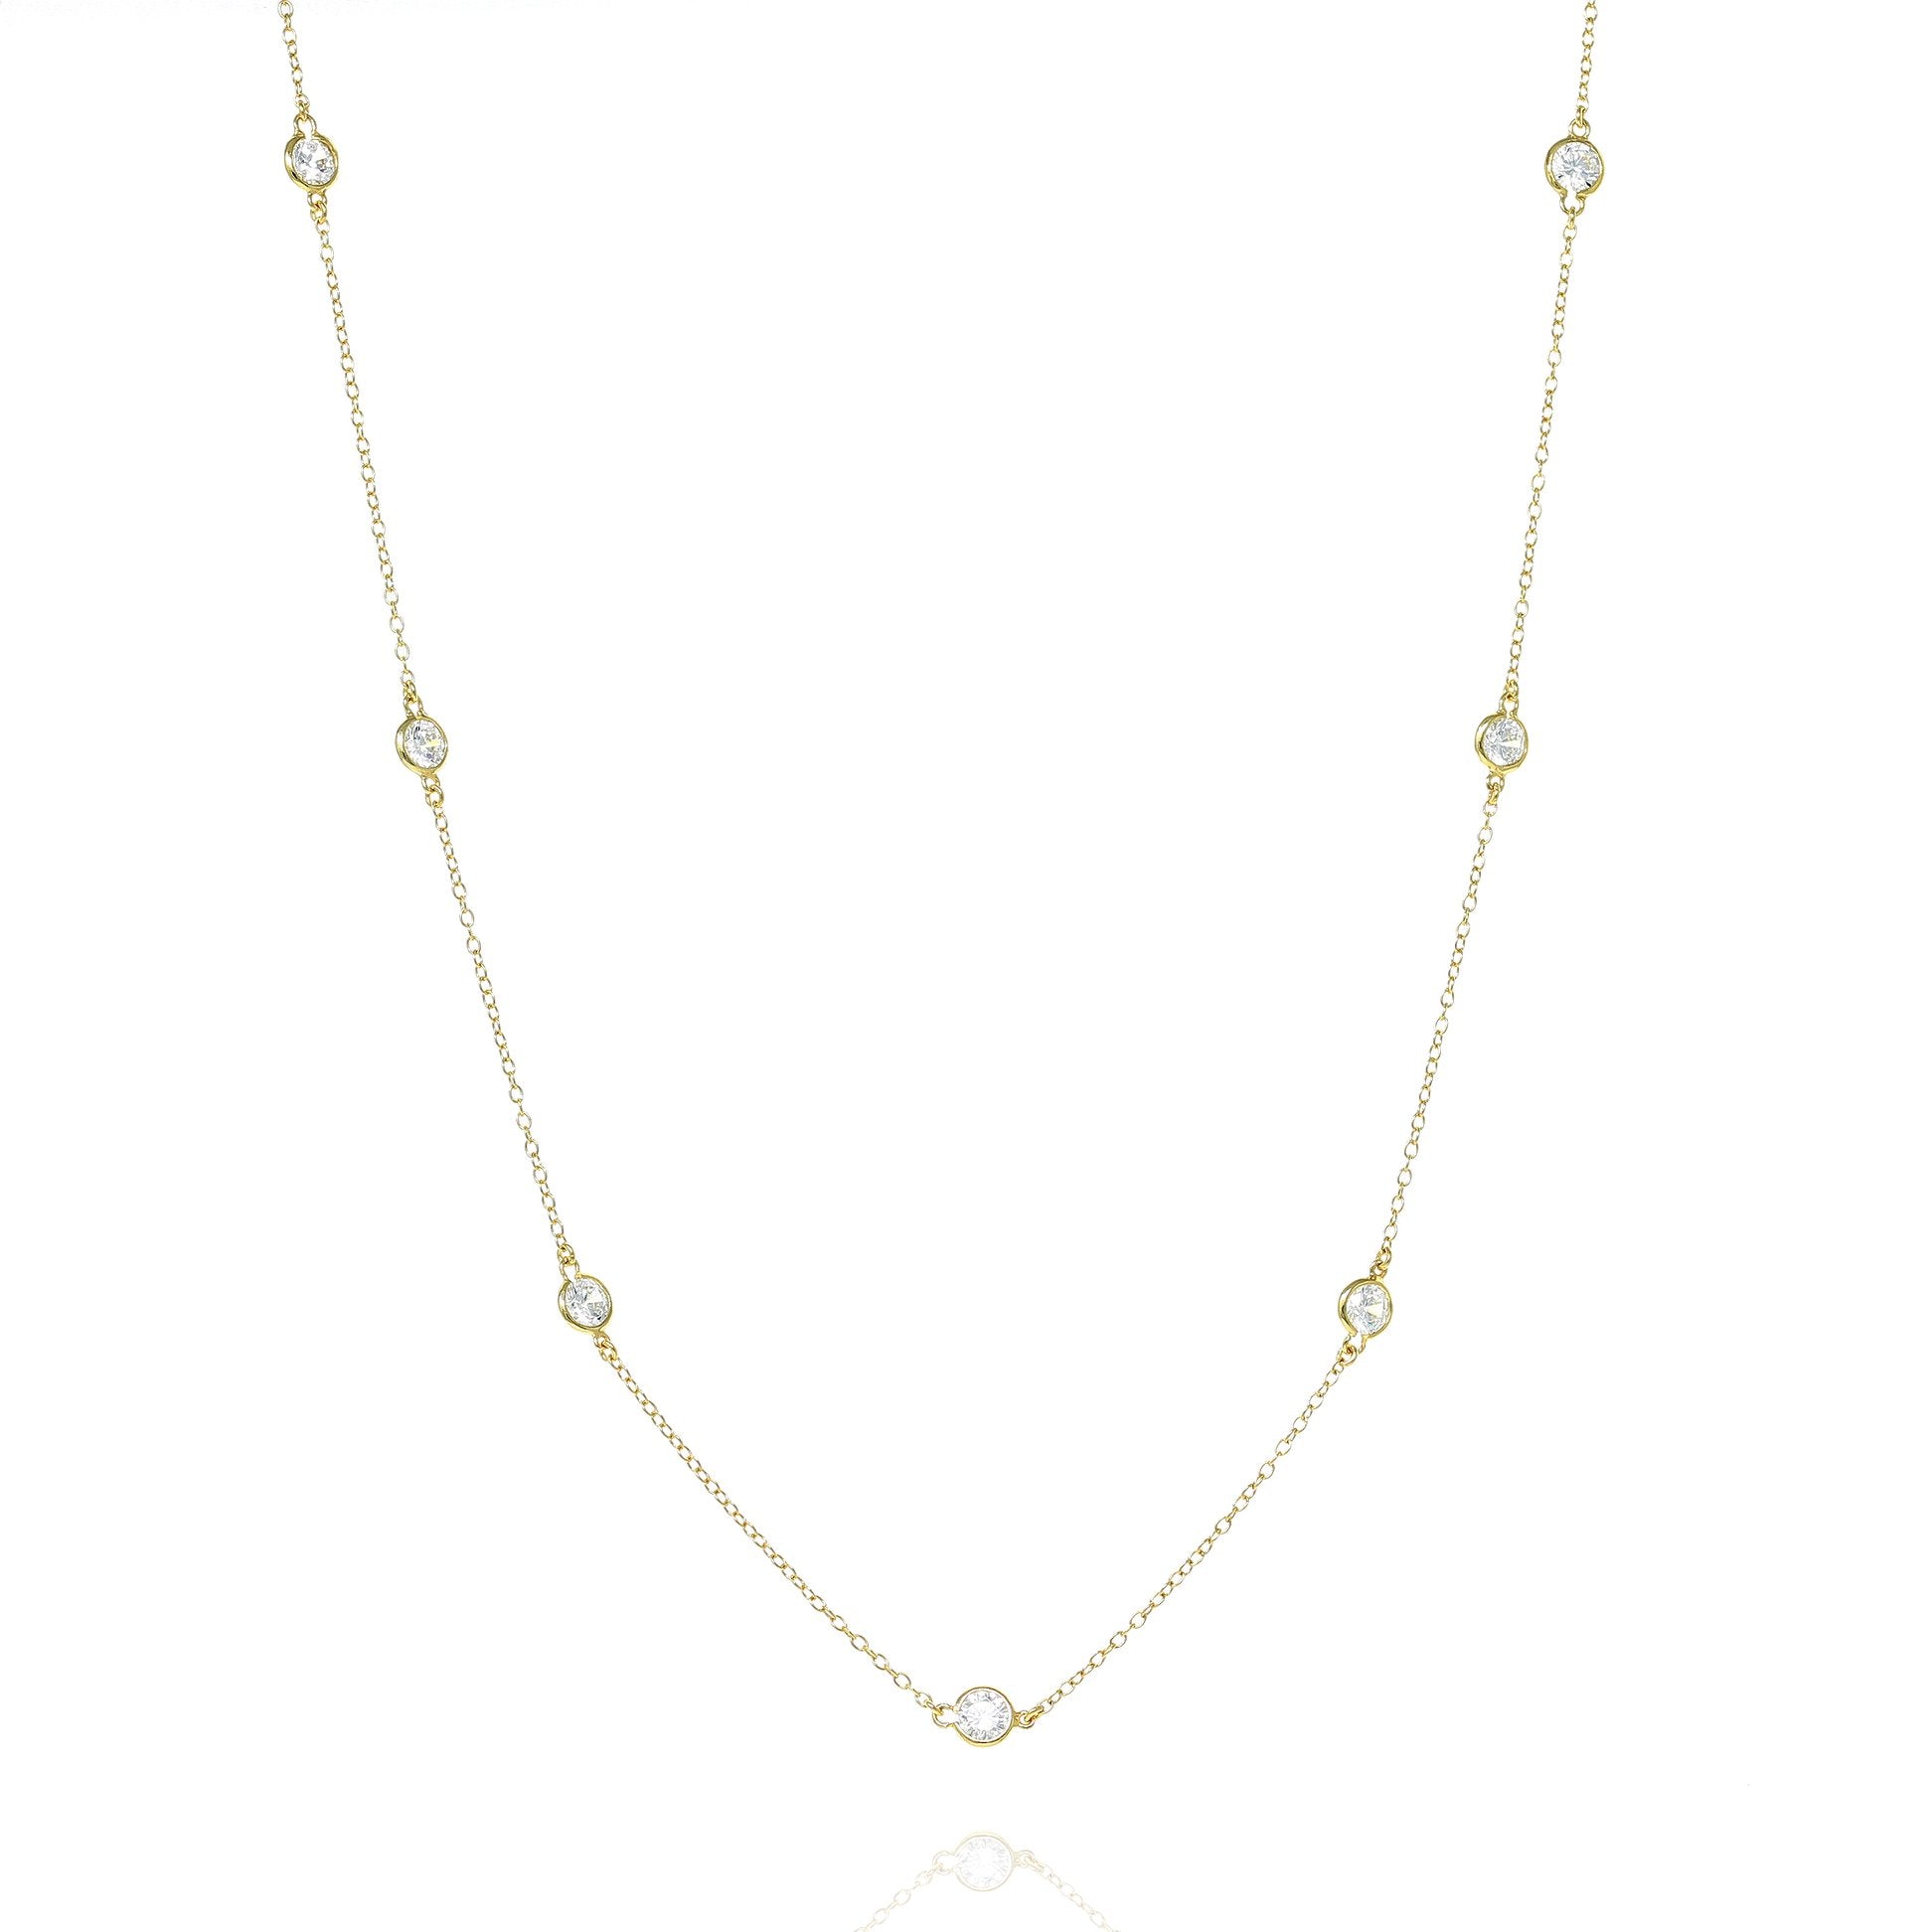 Gold Brompton Chain Necklace with Cubic Zirconia - Lulu B Jewellery